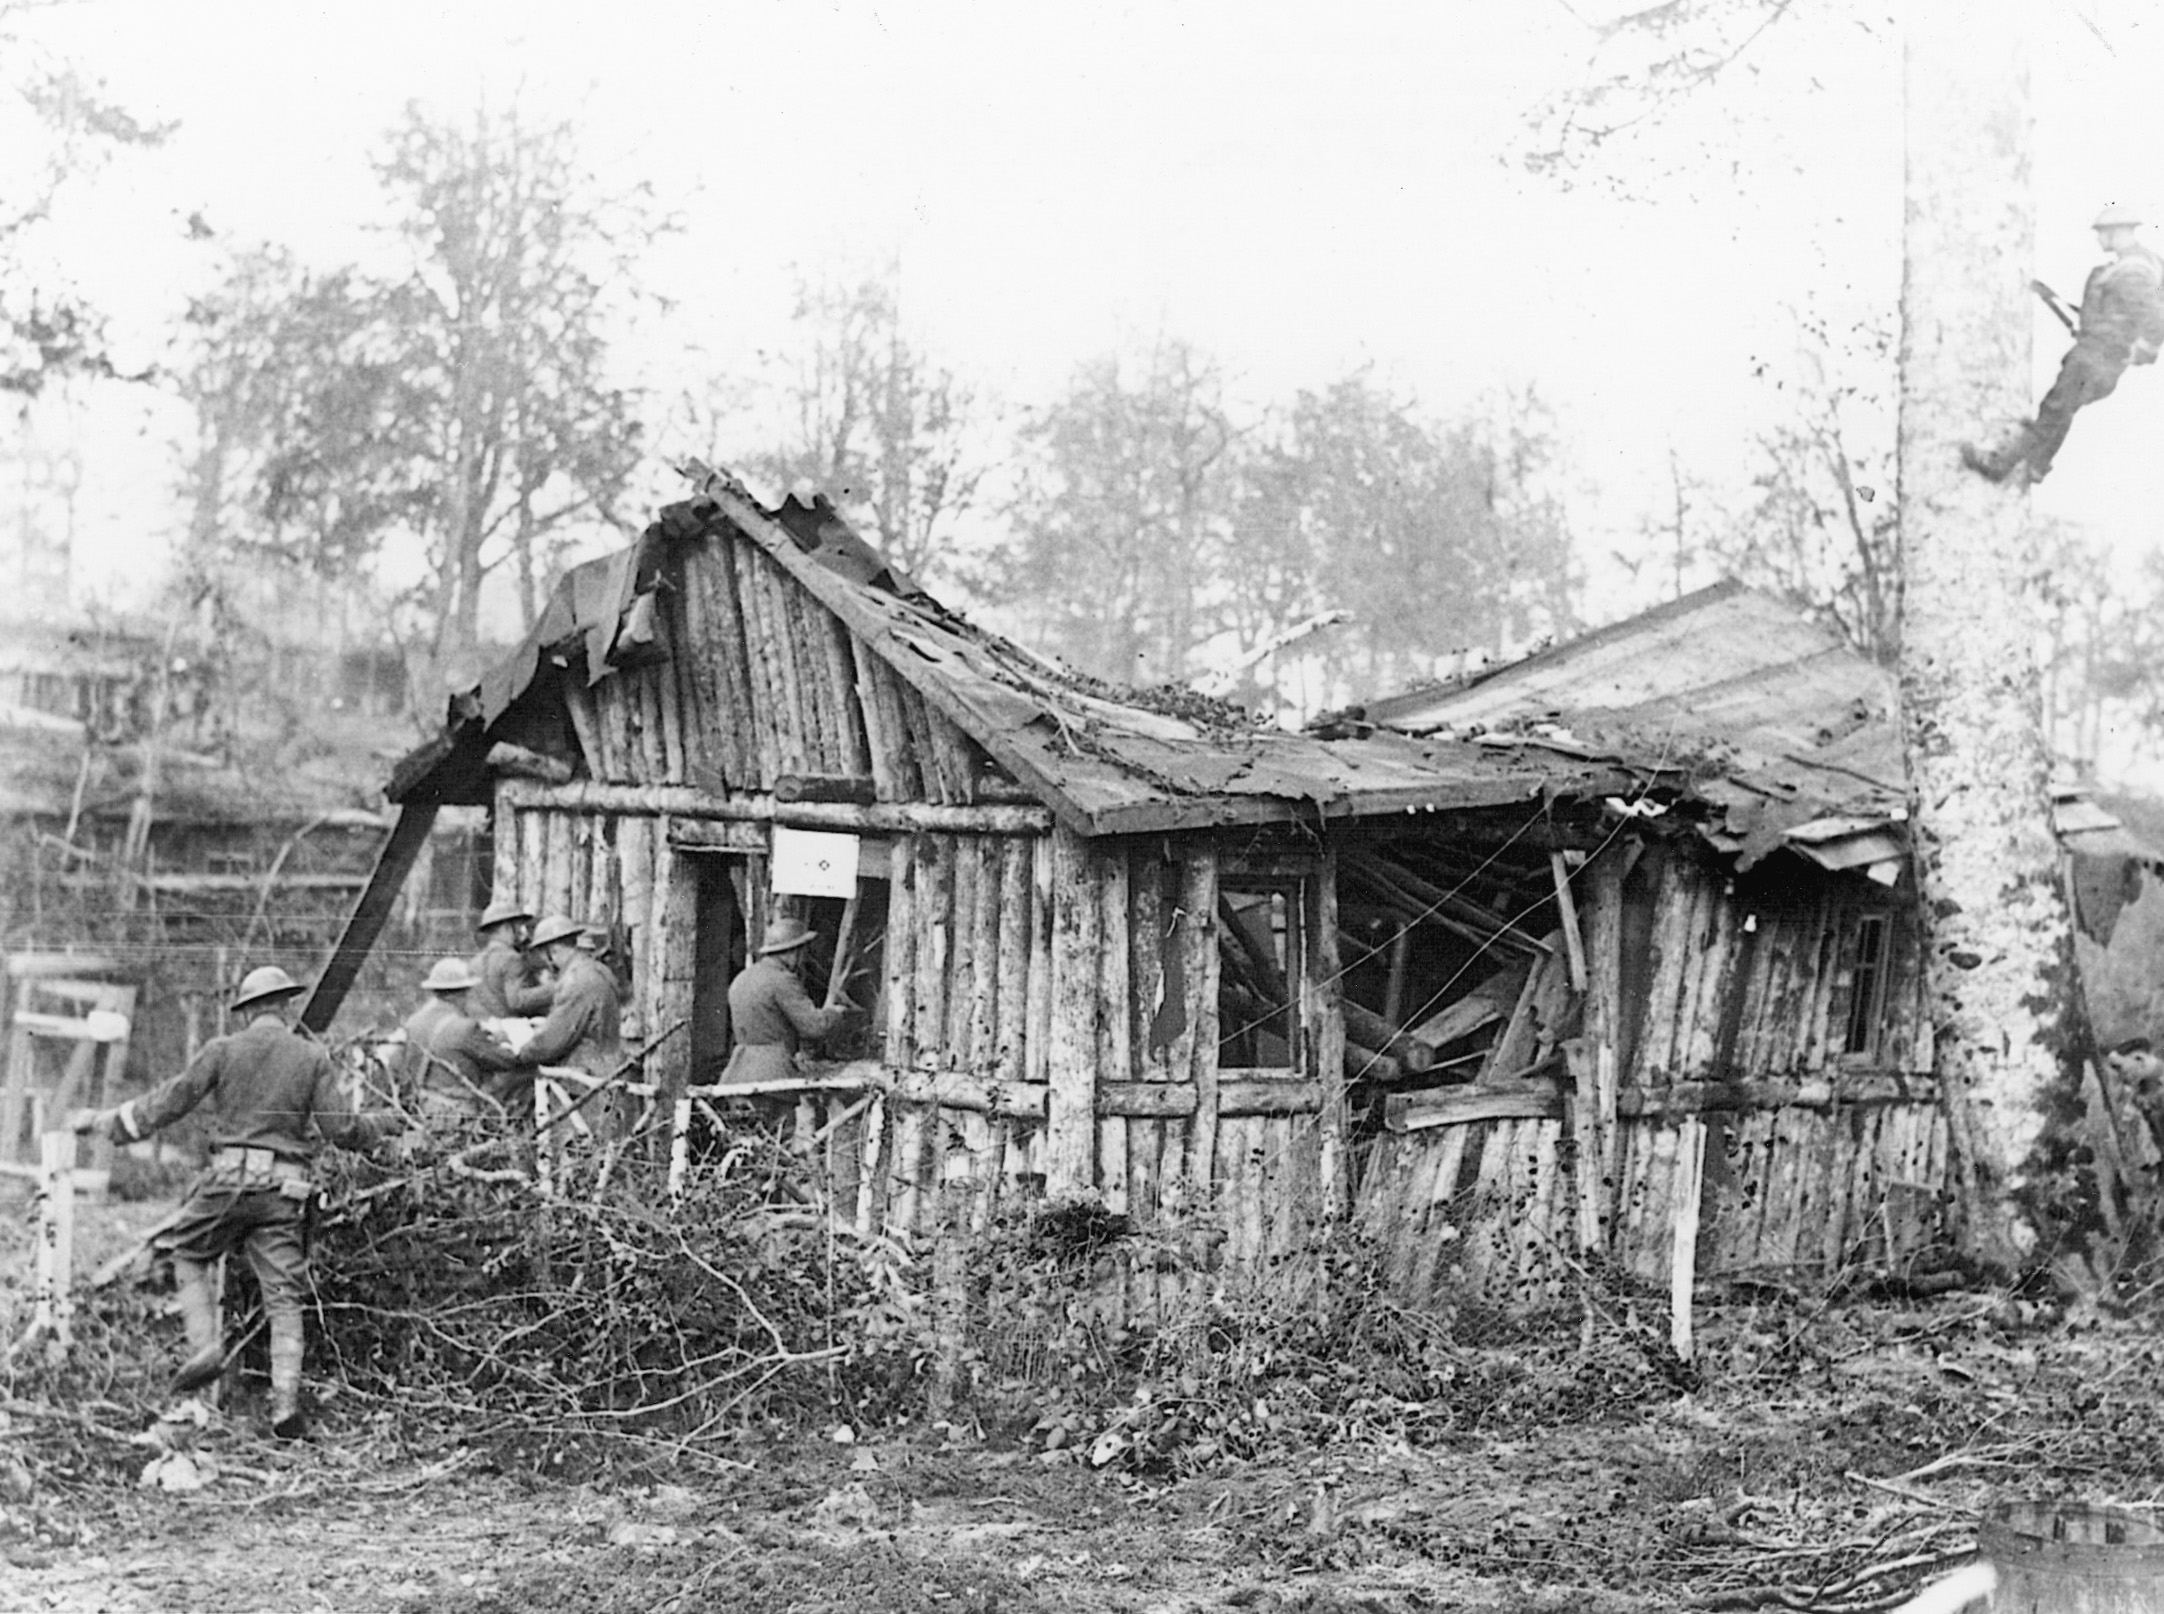 A German shack used for a telephone headquarters near Meuse, France, in November 1918.